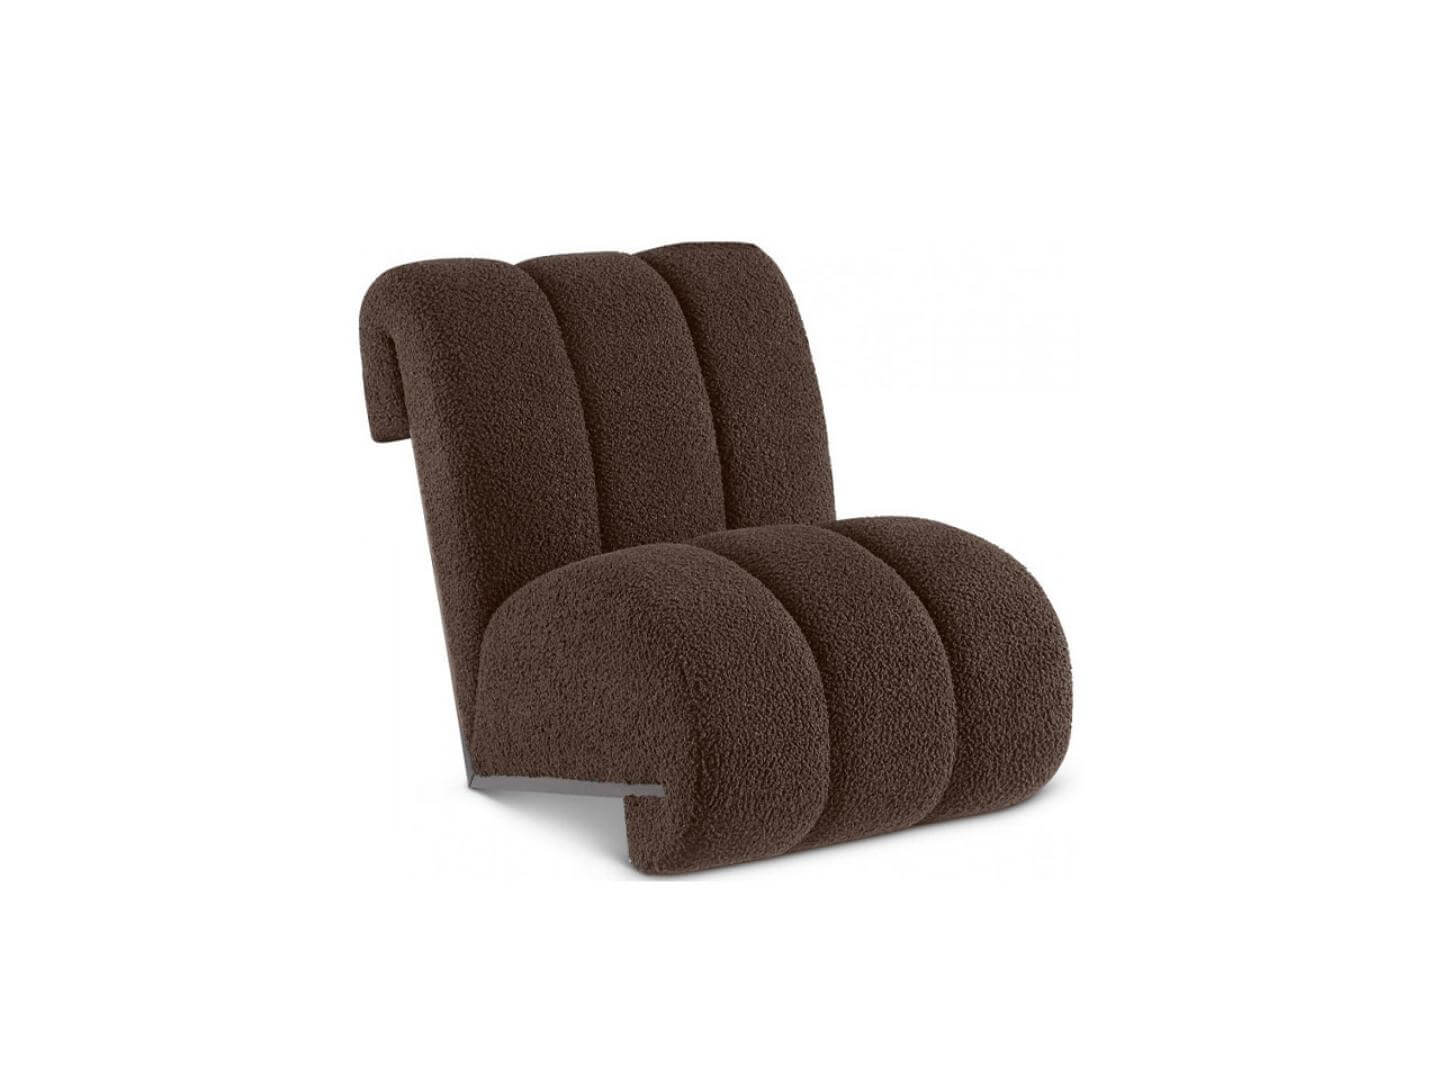 viego armchair brown color - LUX FURNITURE